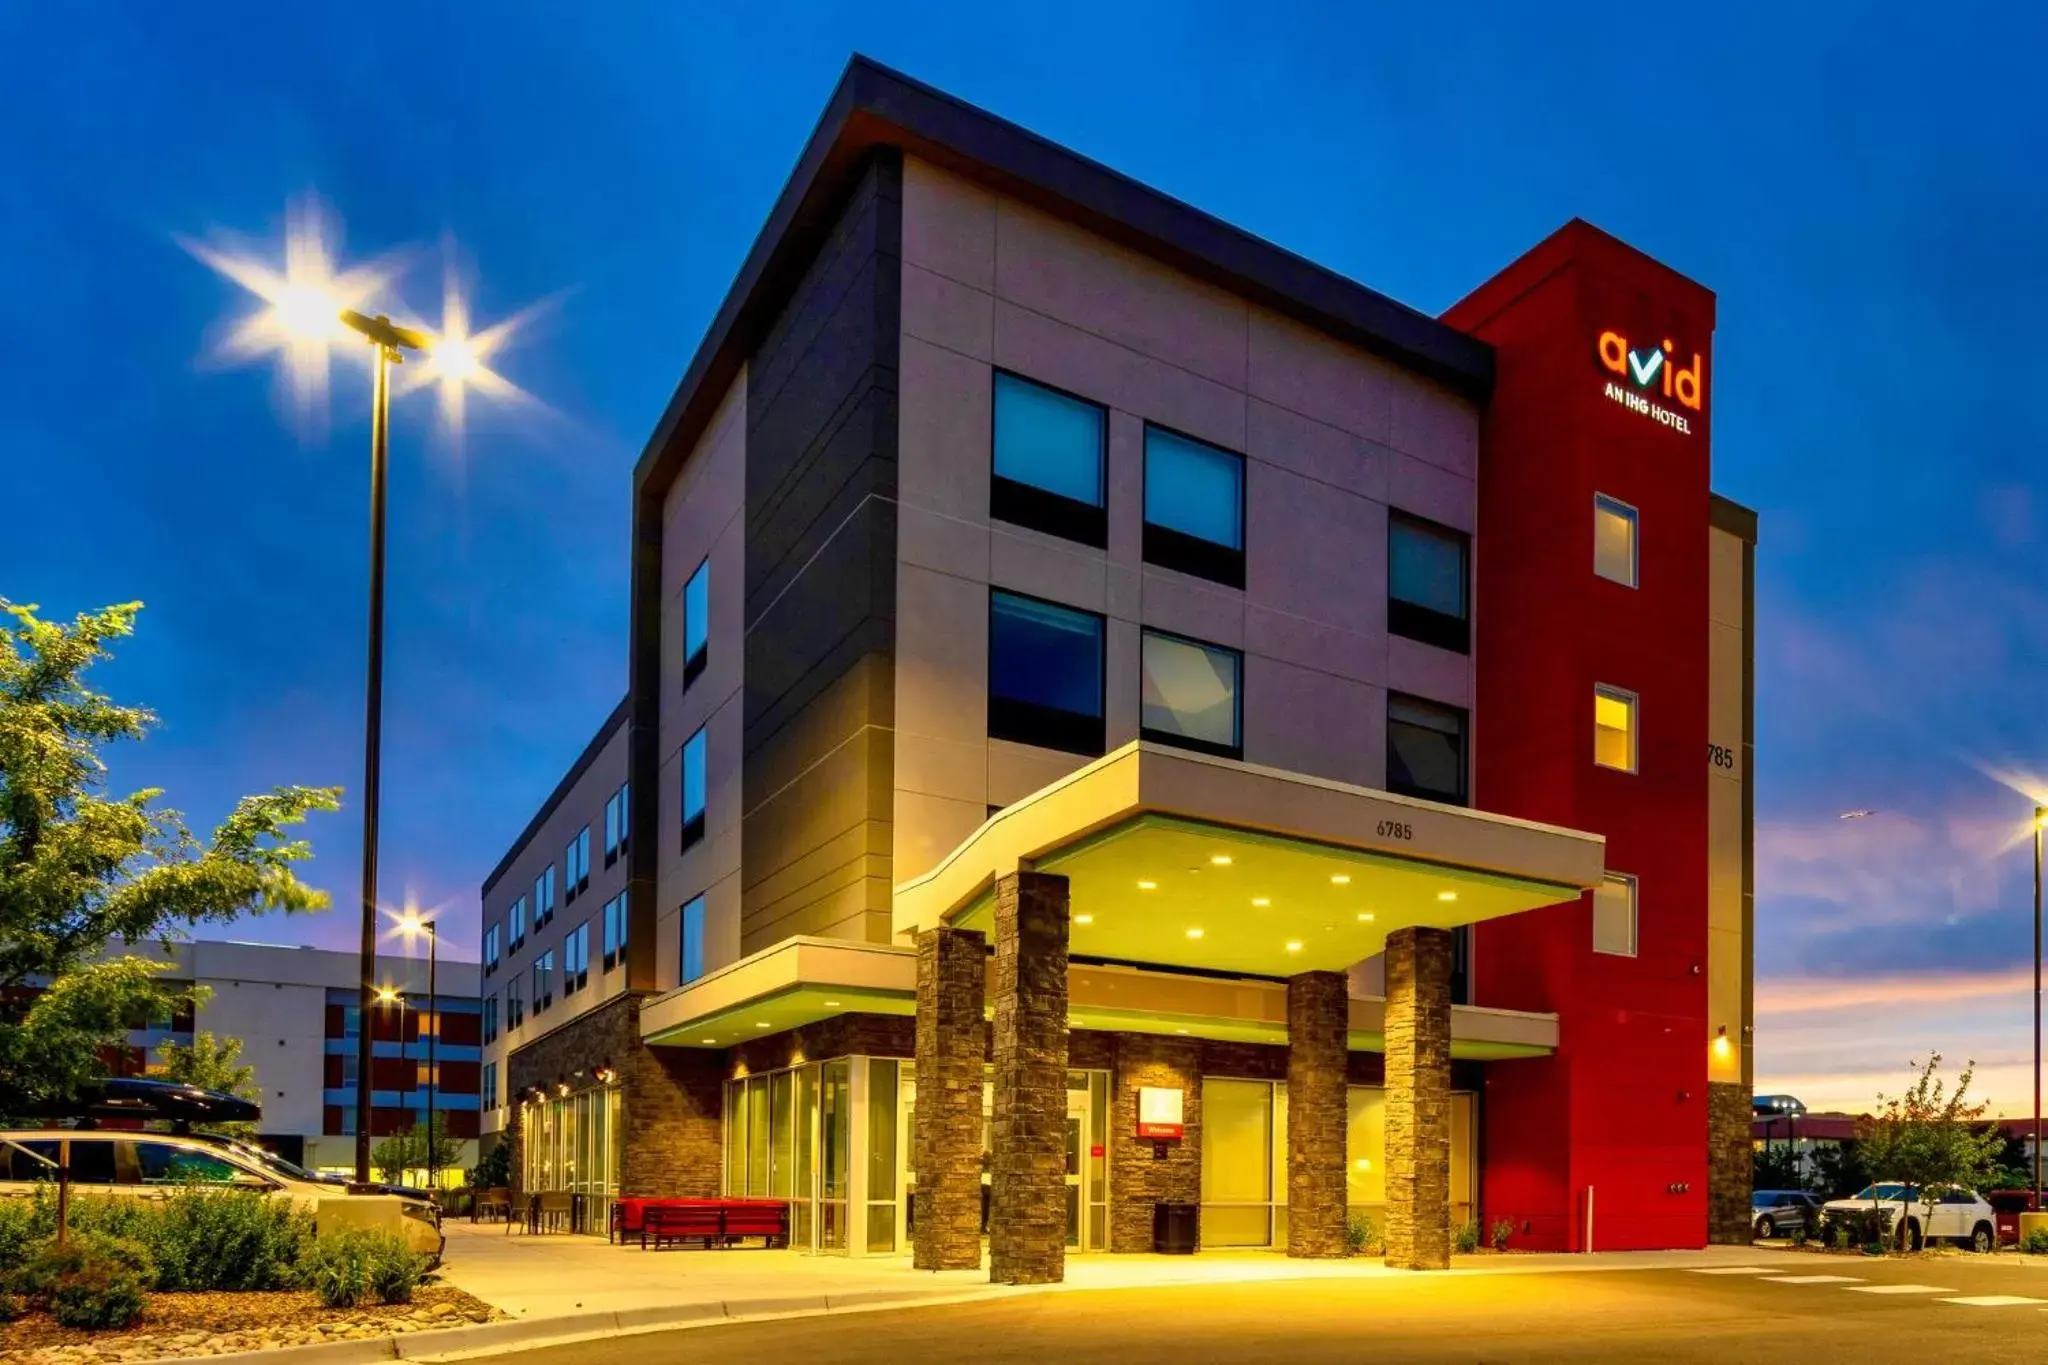 Property Building in Avid Hotels - Denver Airport Area, an IHG Hotel